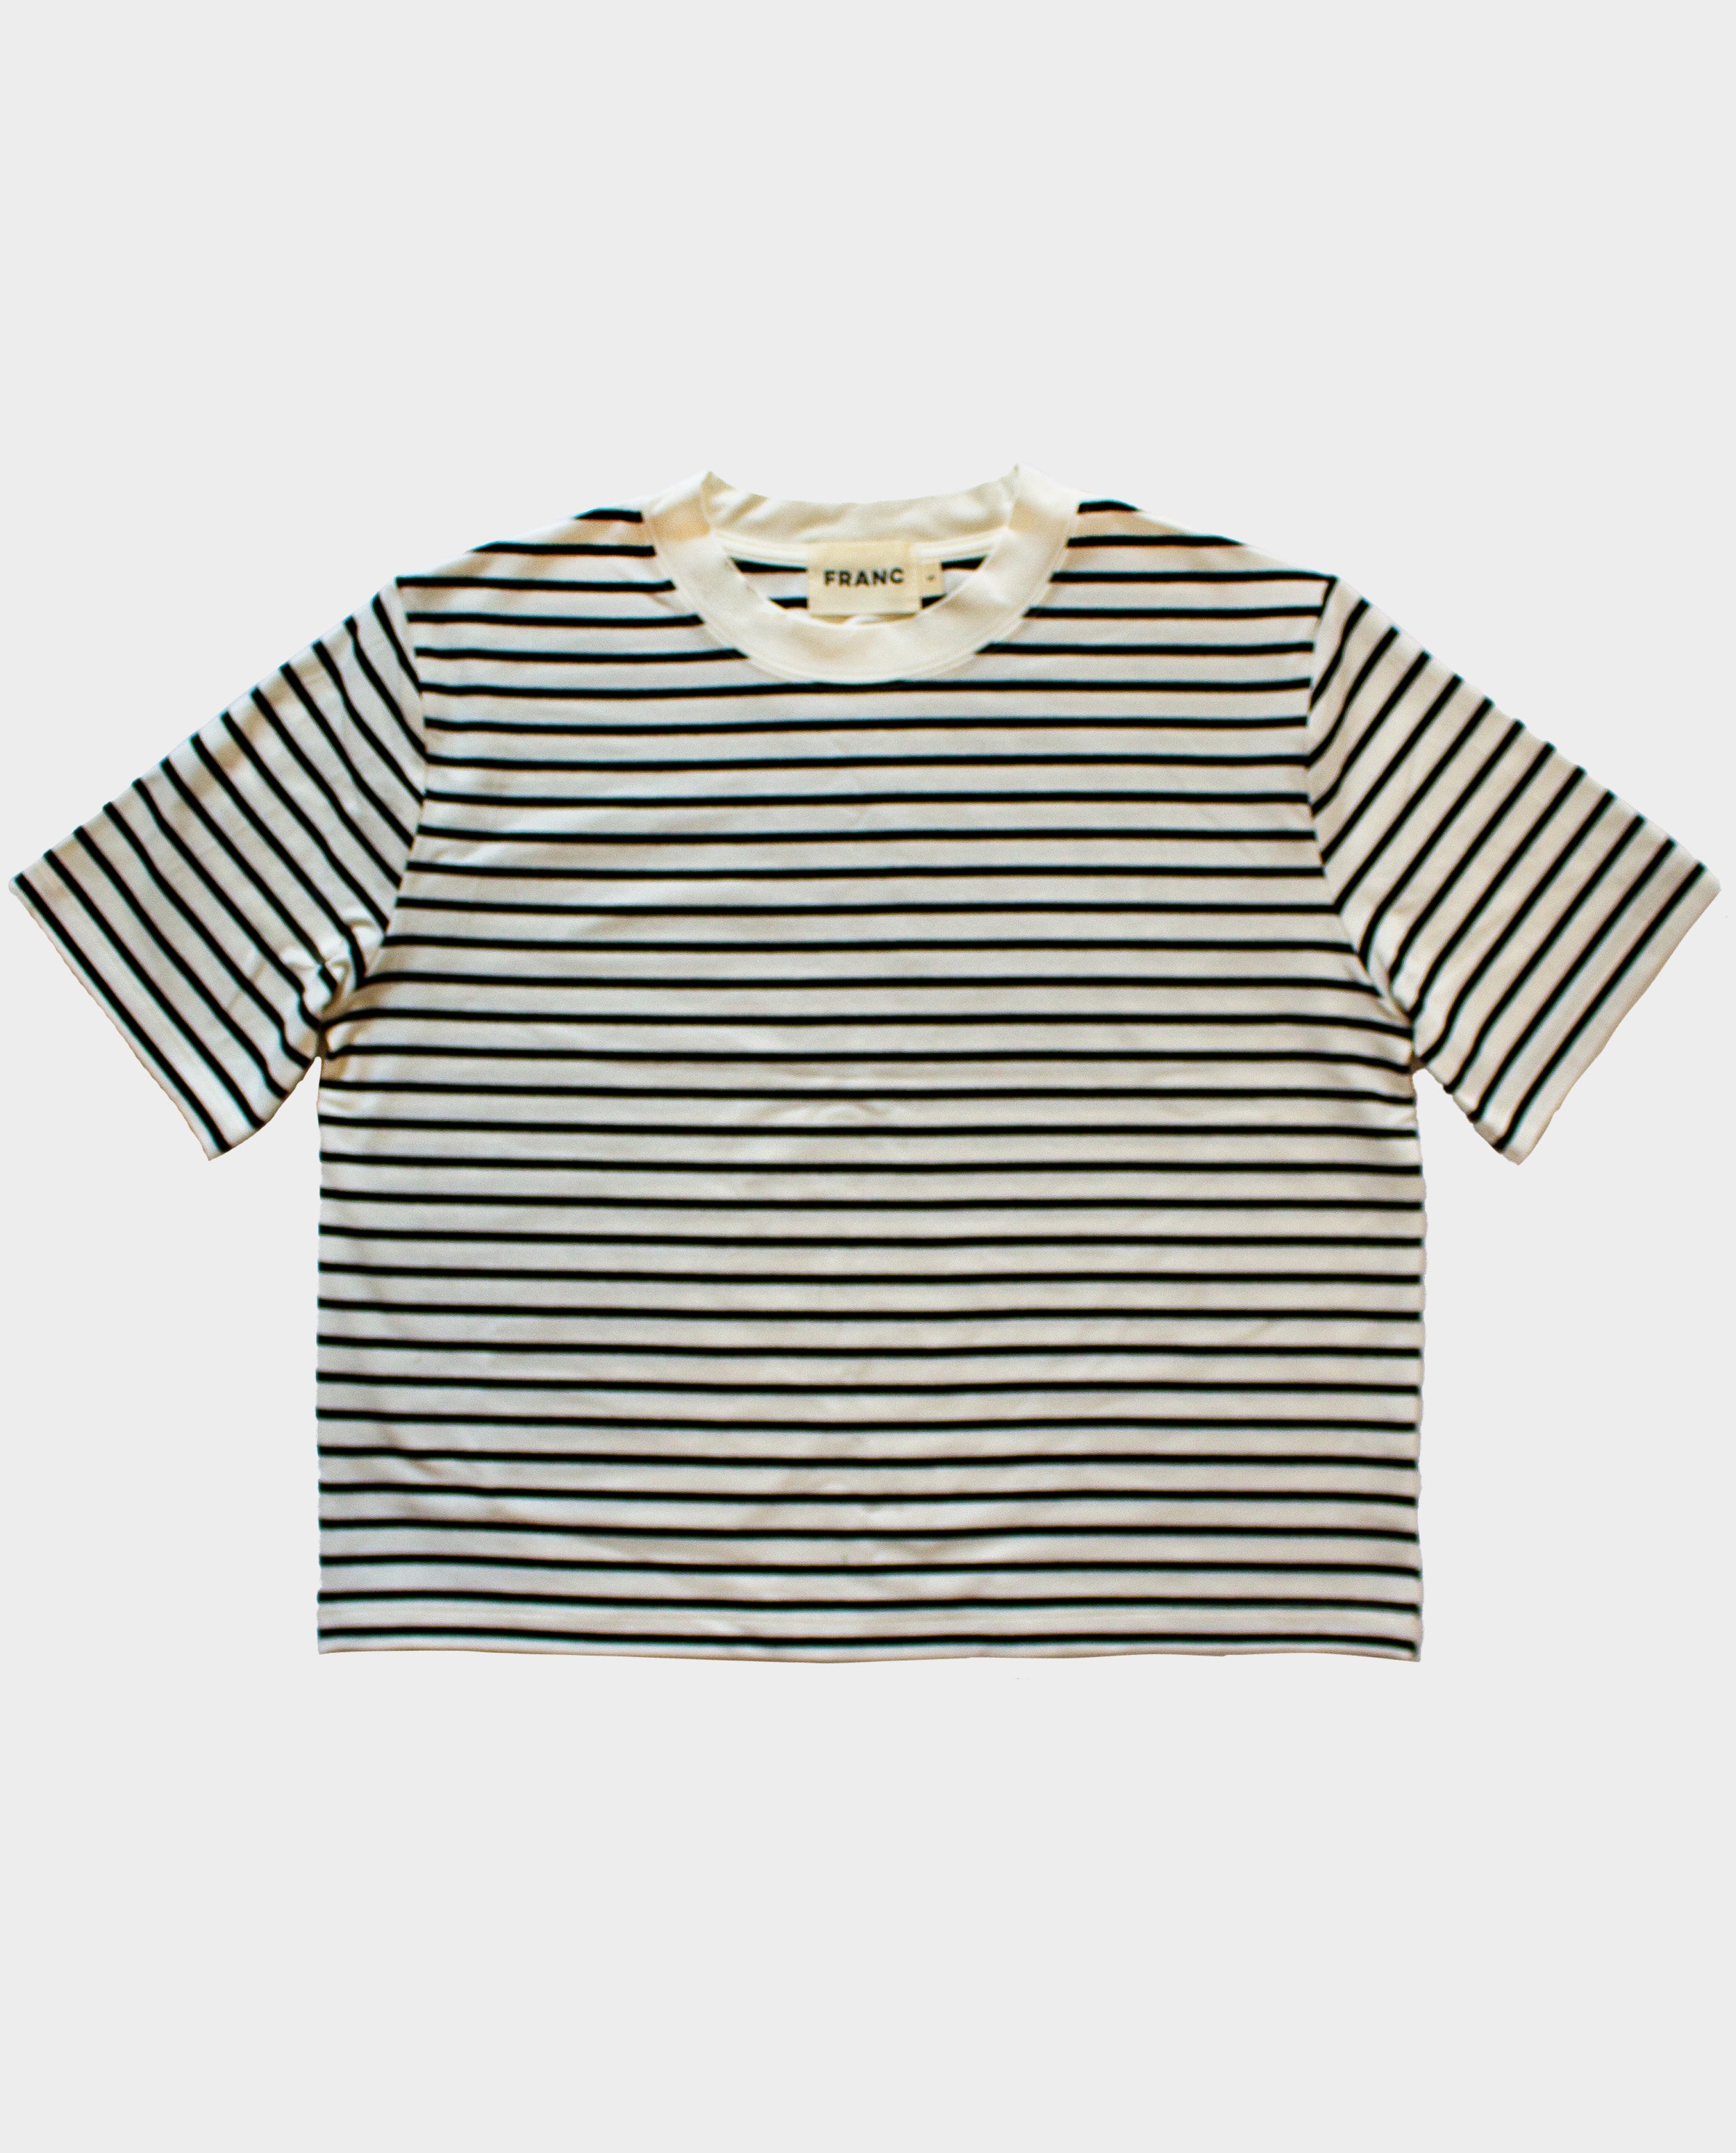 The Boxy Tee in Black Stripe | FRANC Sustainable Clothing